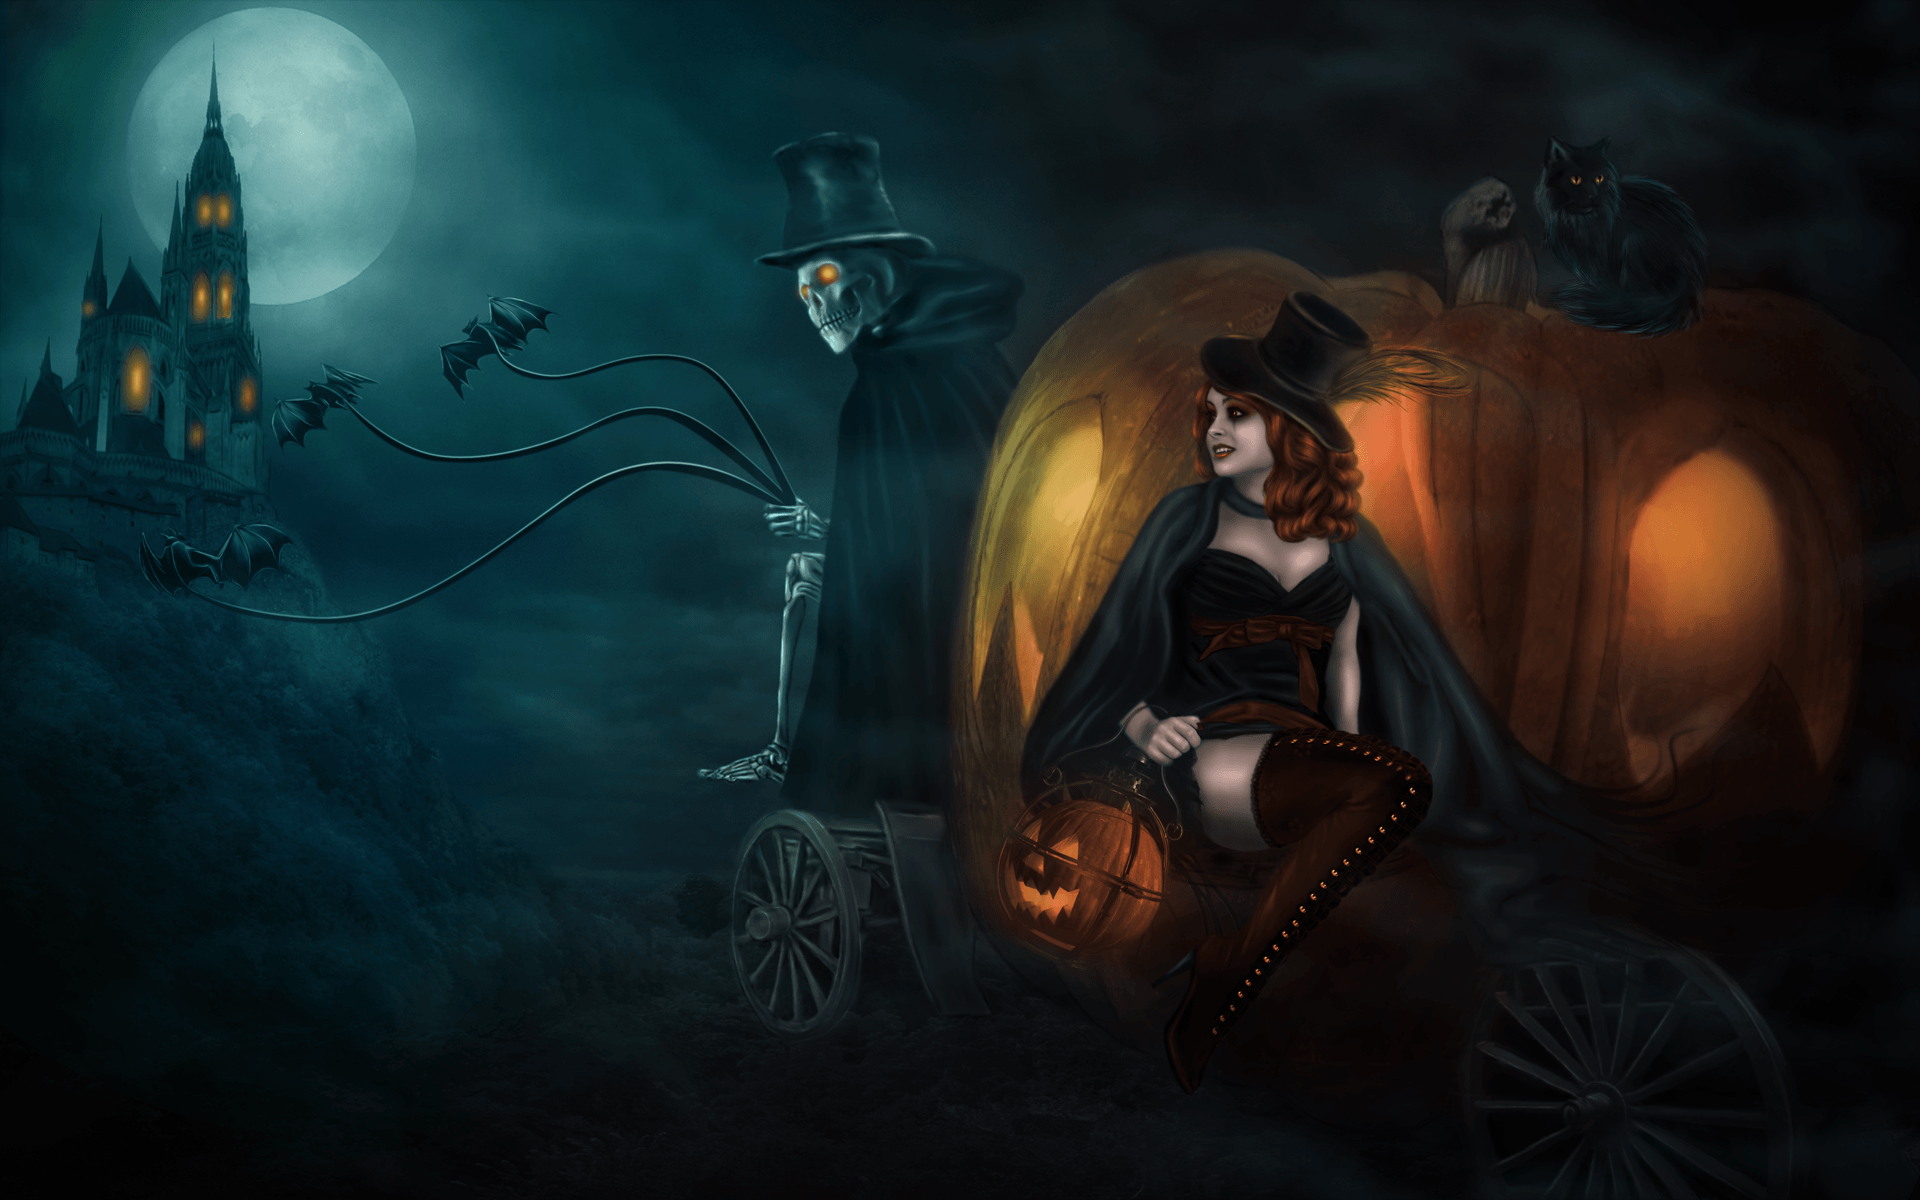 Witch PowerPoint Background. Witch